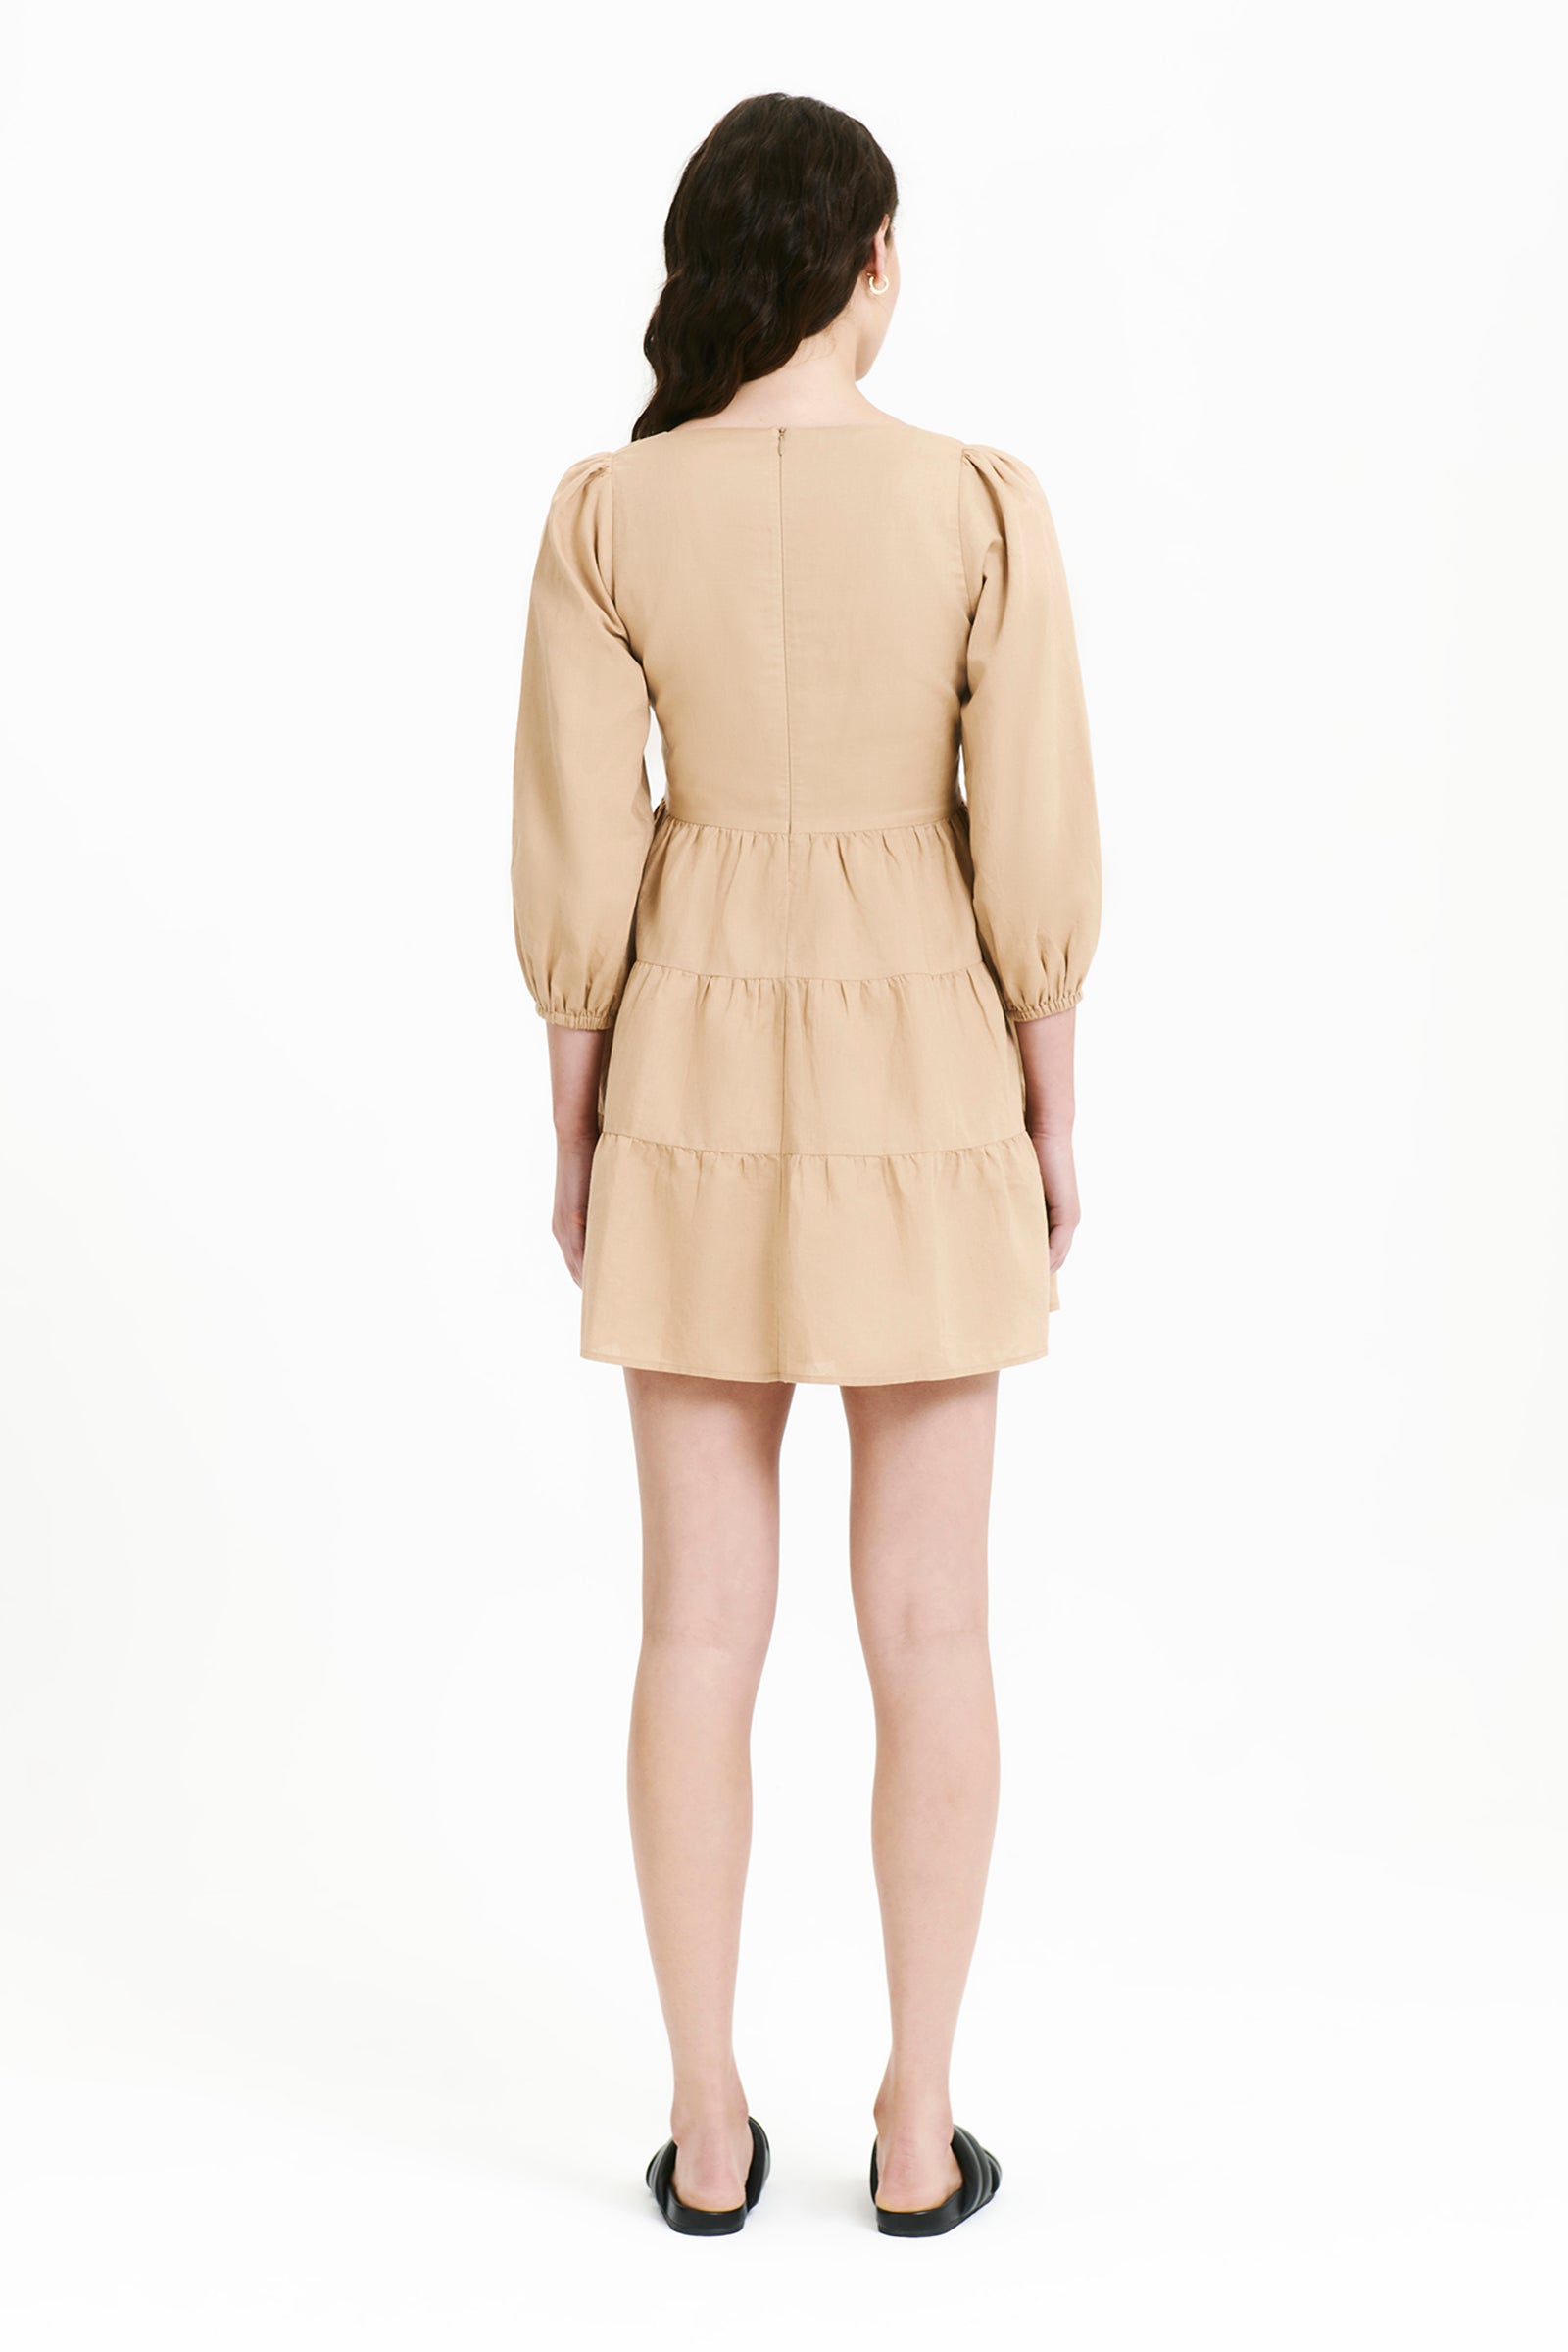 Nude Lucy Brooke Mini Dress In A Light Yellow Toned Dune Colour